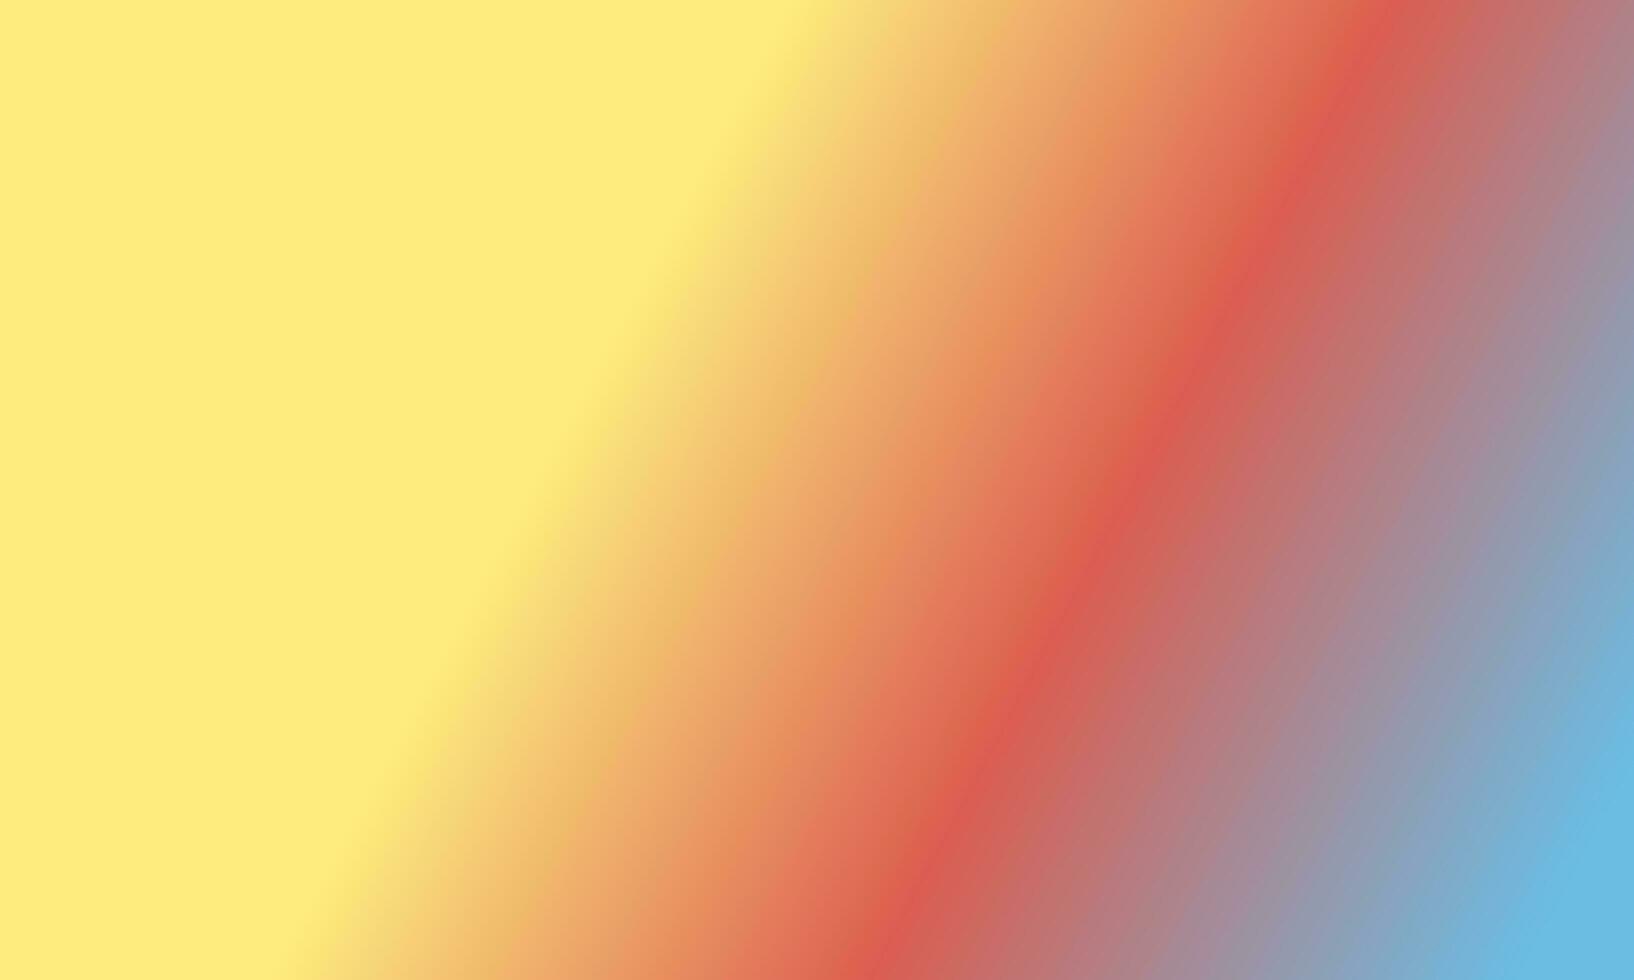 Design simple pastel yellow,blue and red gradient color illustration background photo